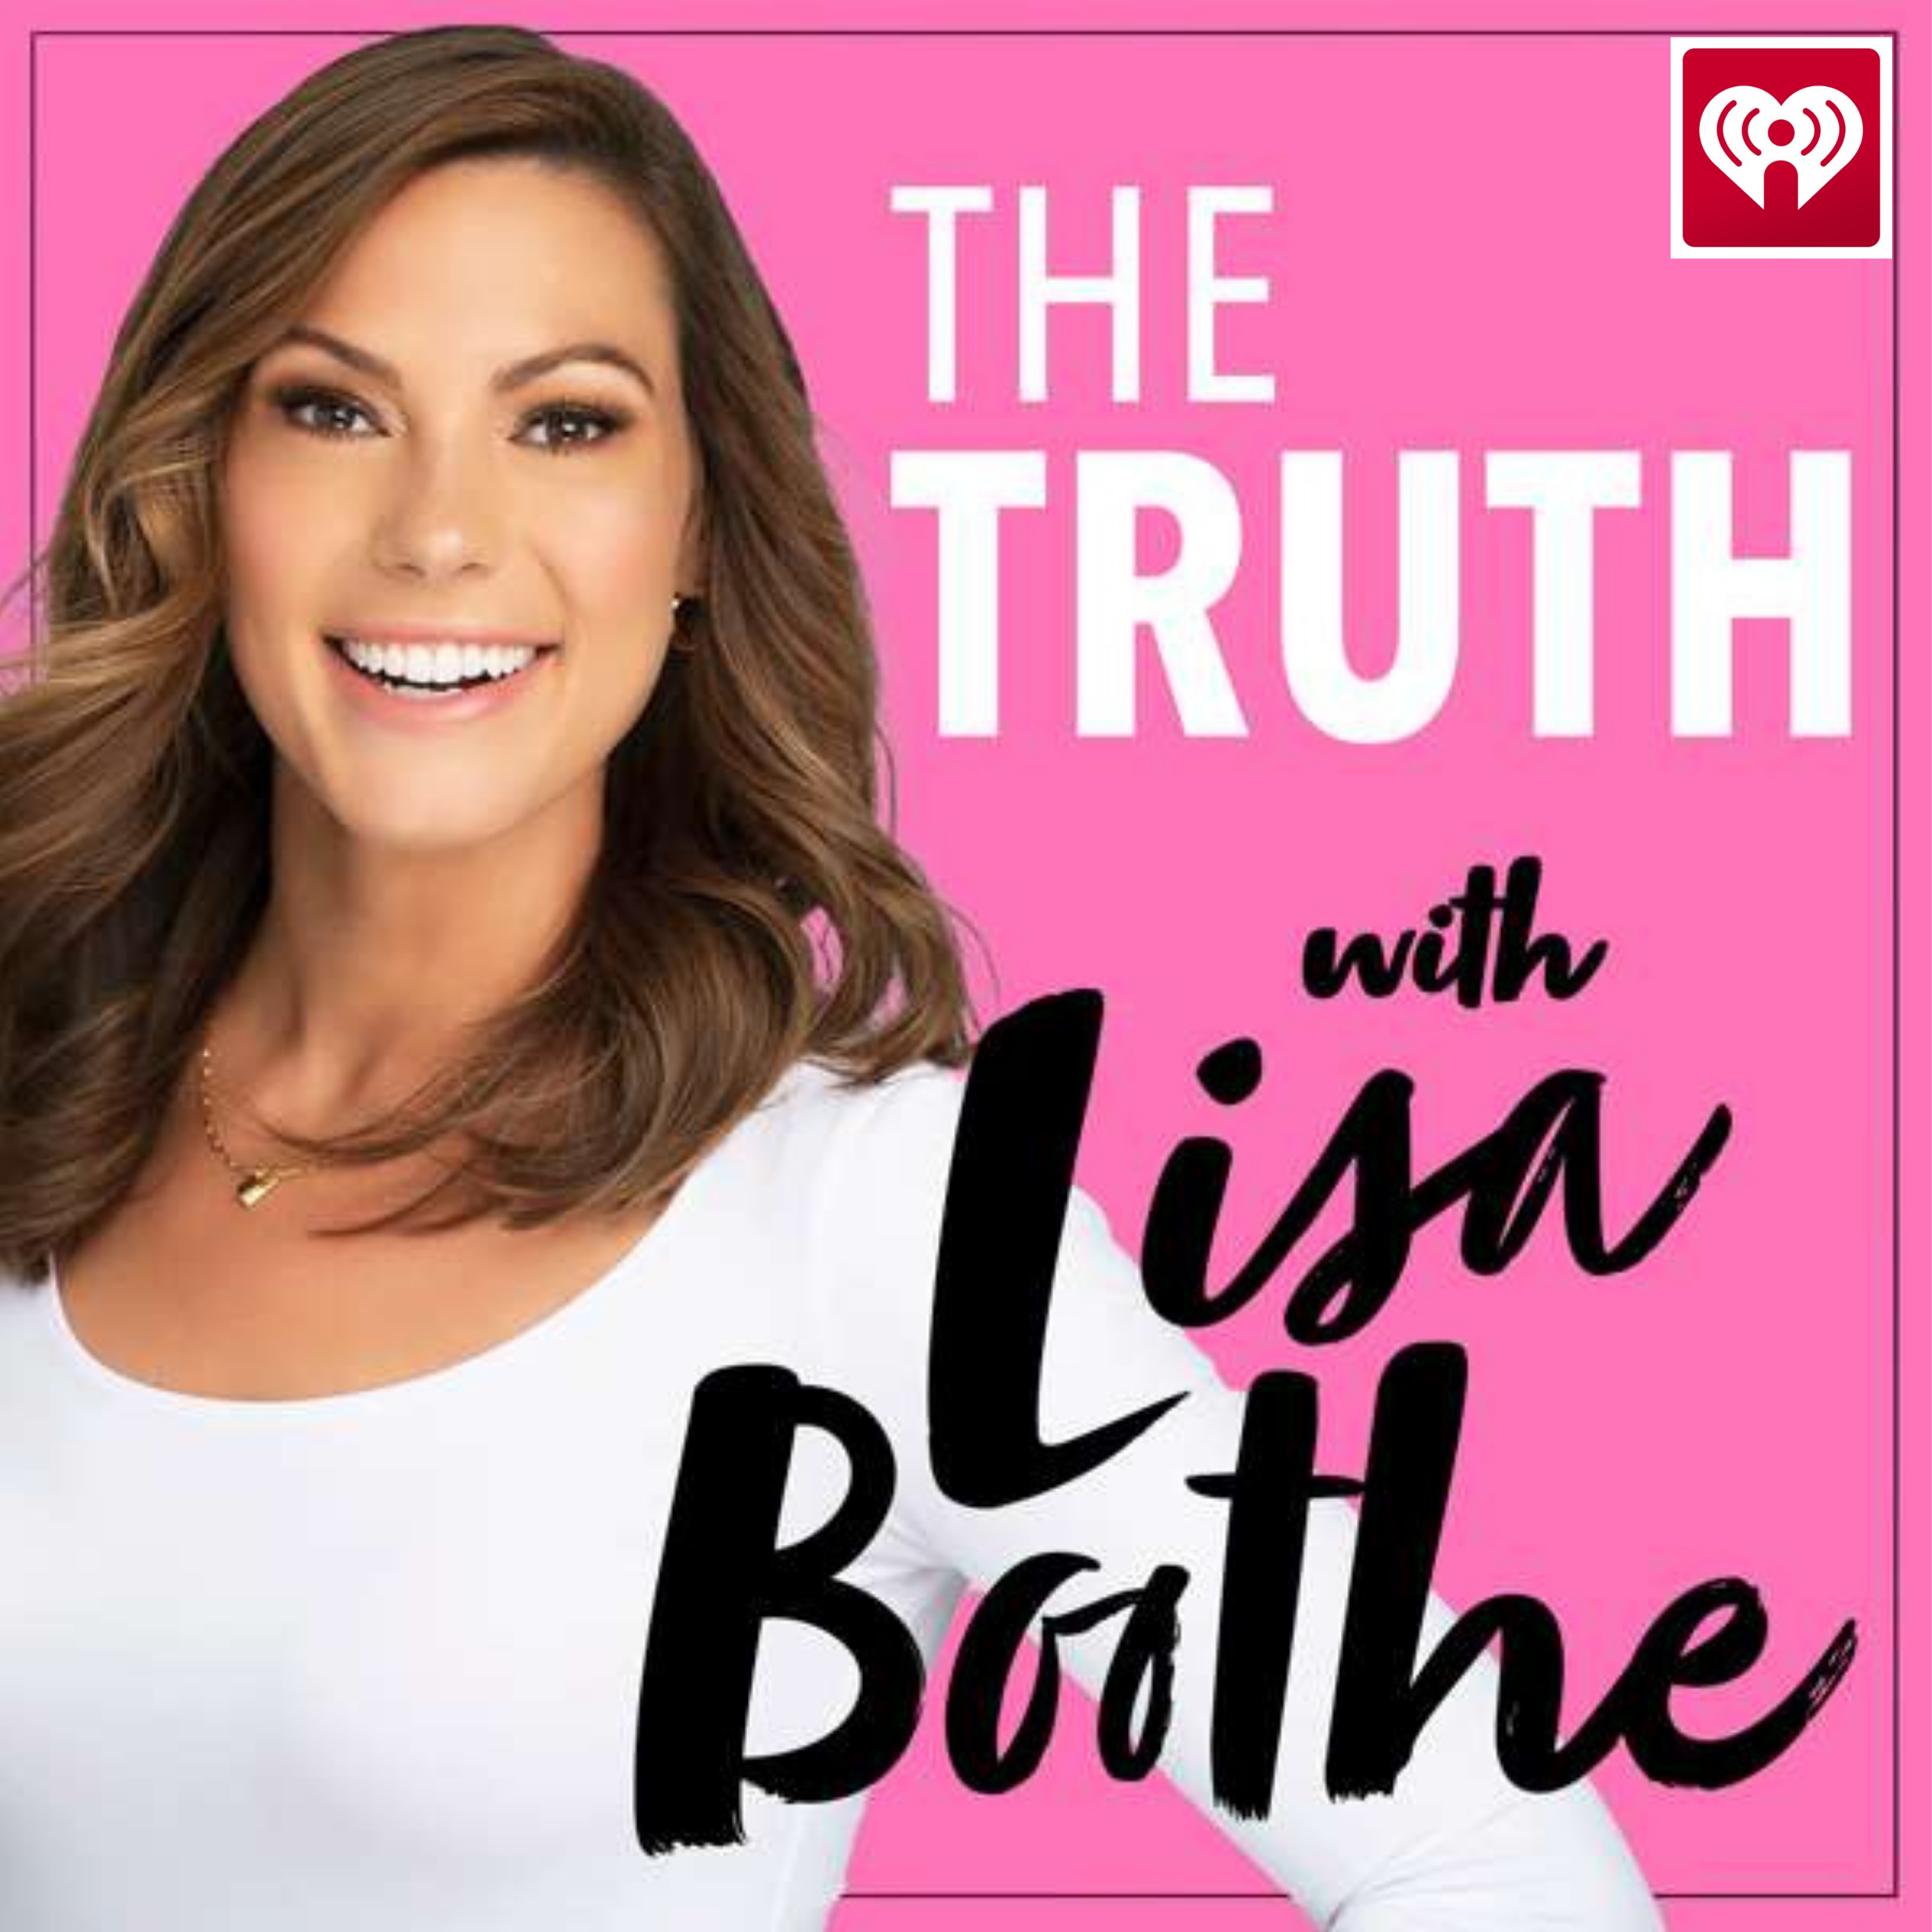 The Truth with Lisa Boothe: The American Playbook with Clay Travis